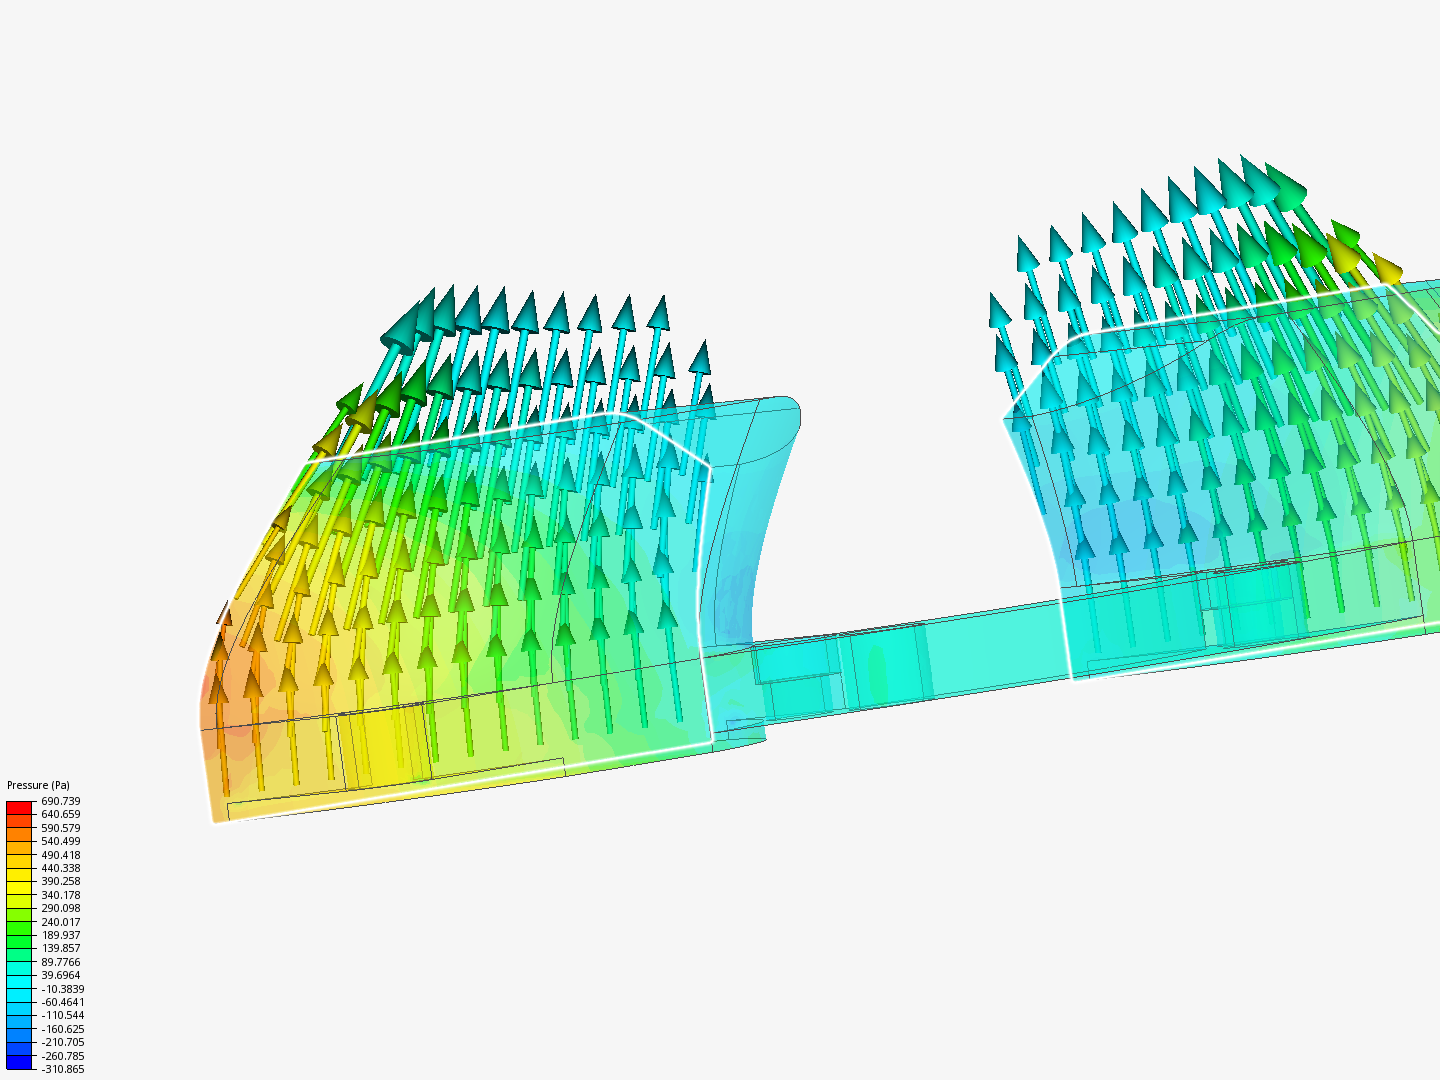 axial duct simulation image